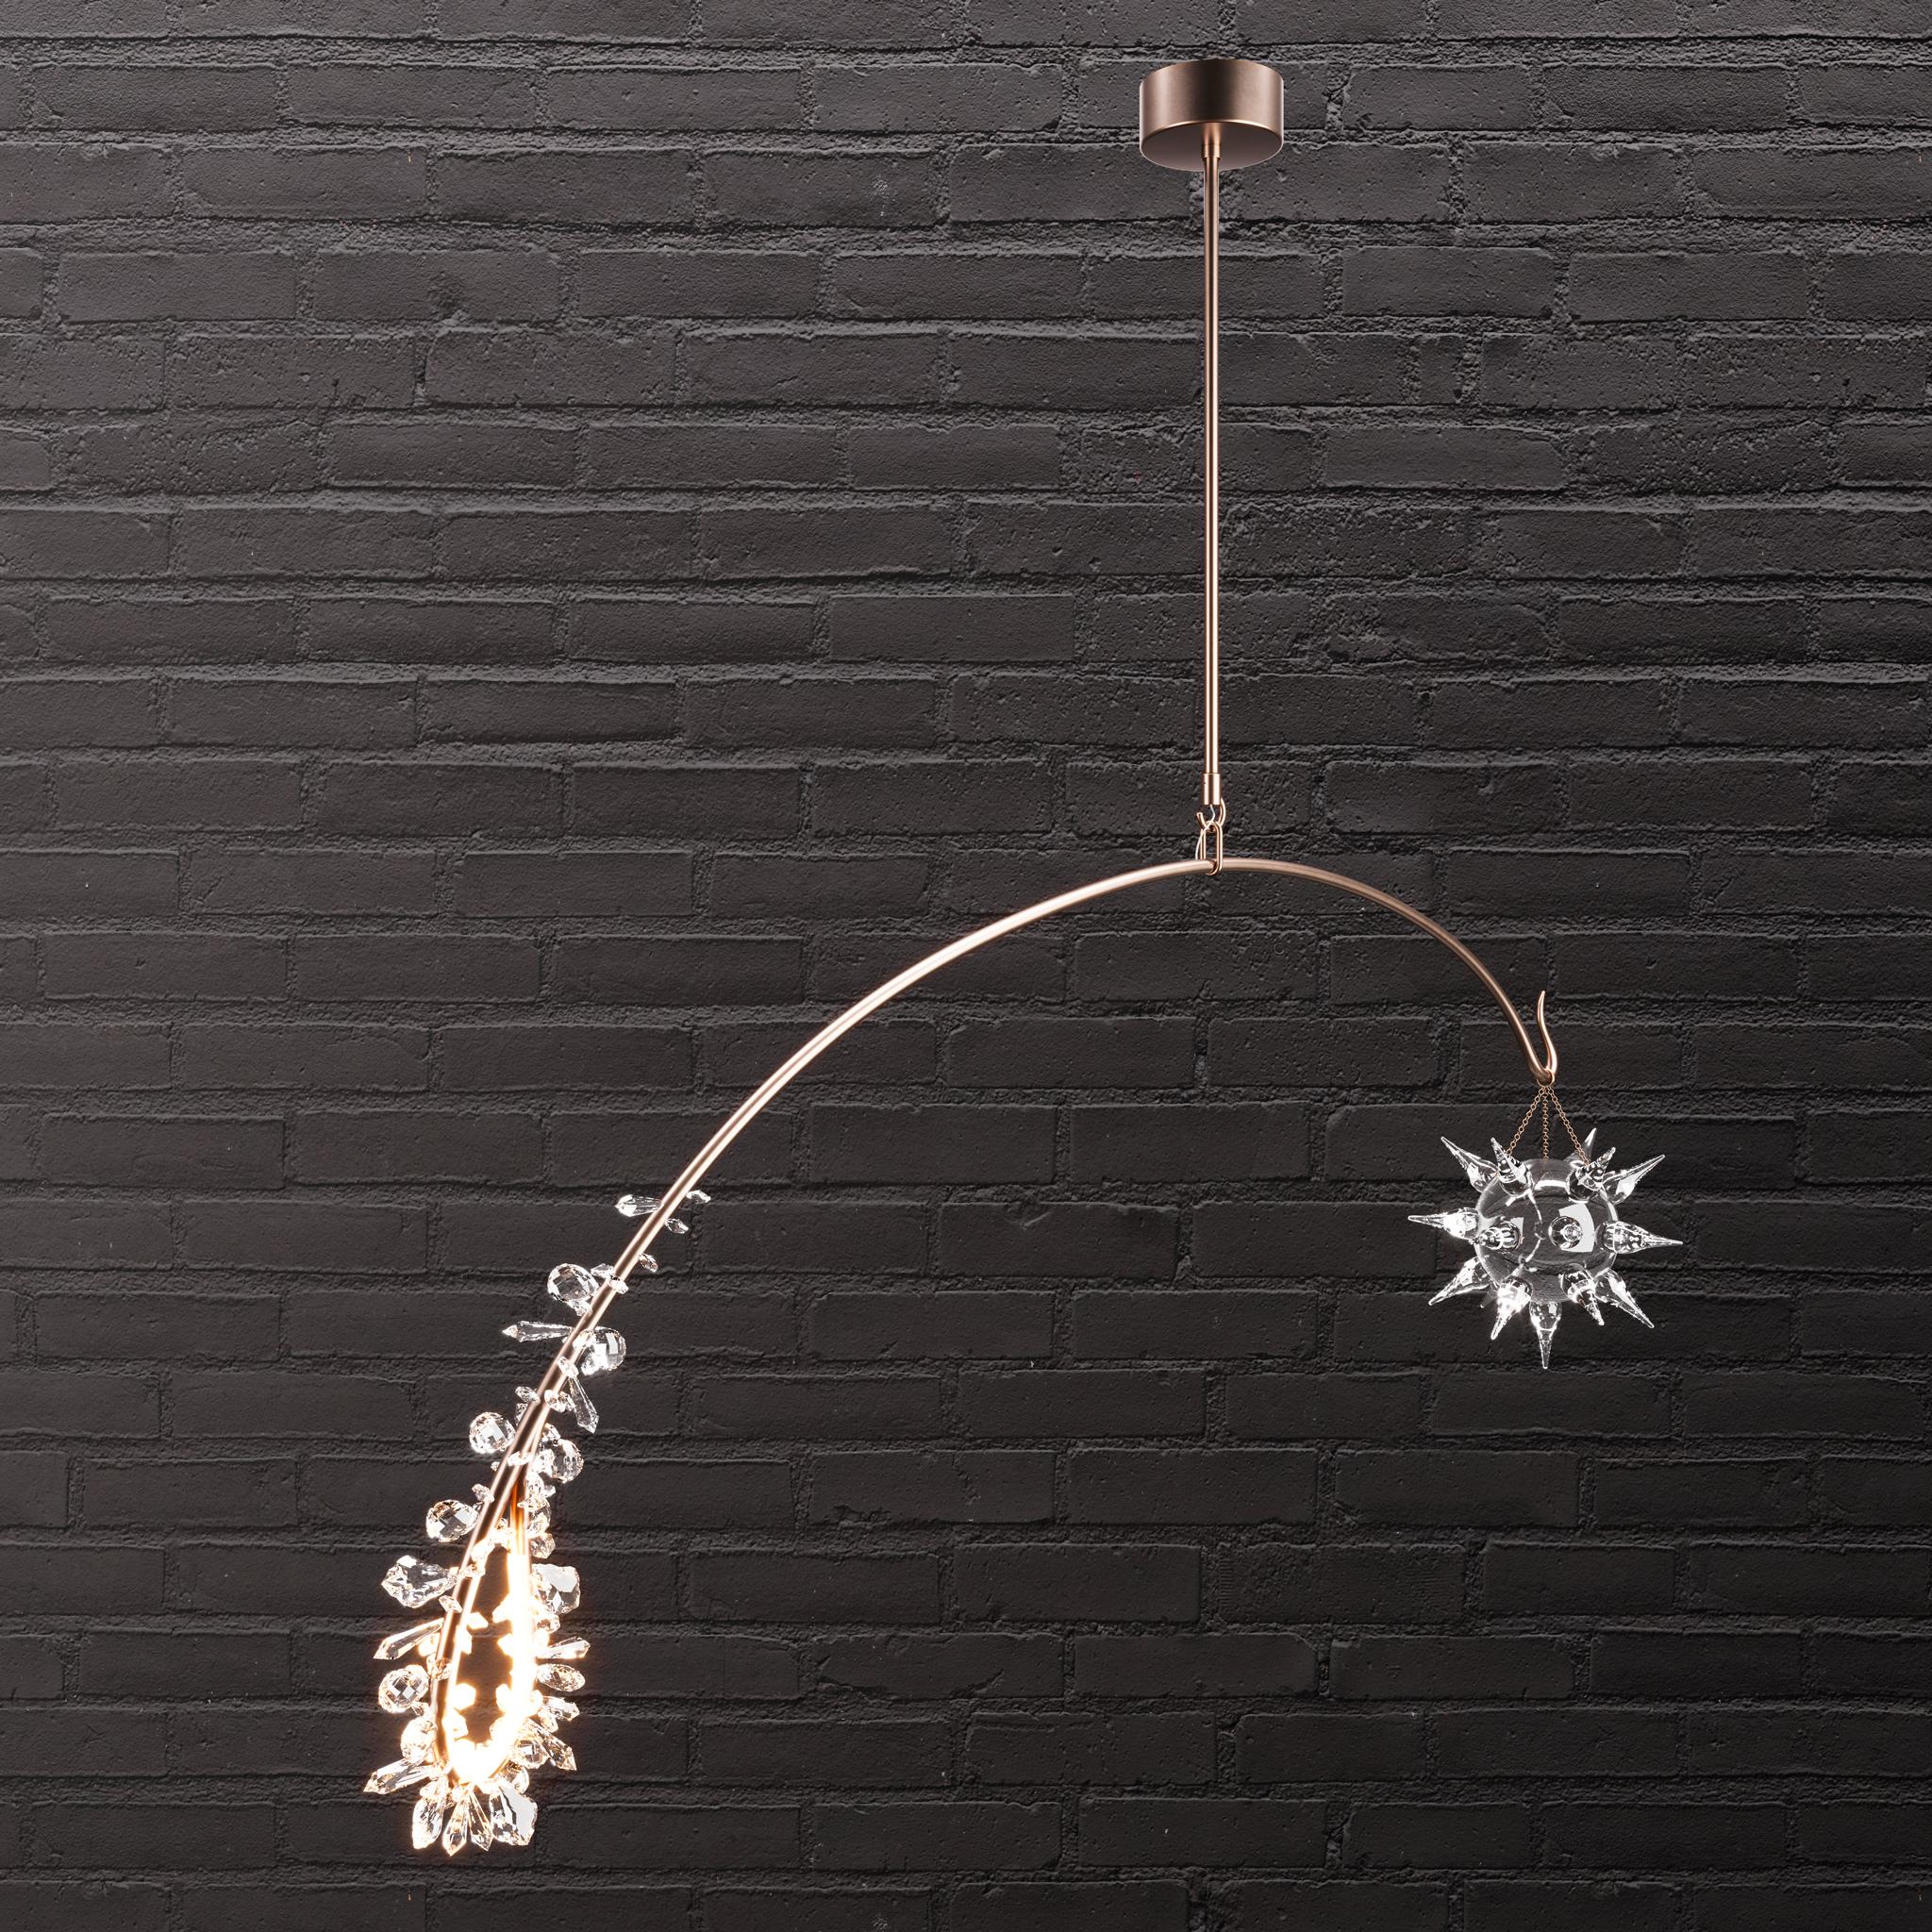 A study in equilibrium - a spiked starburst of handblown Murano glass hovers opposite a cluster of Austrian crystal facets - balanced on a solid brass arm.

Models in the collection are individually hand-crafted by the skilled artisans in our